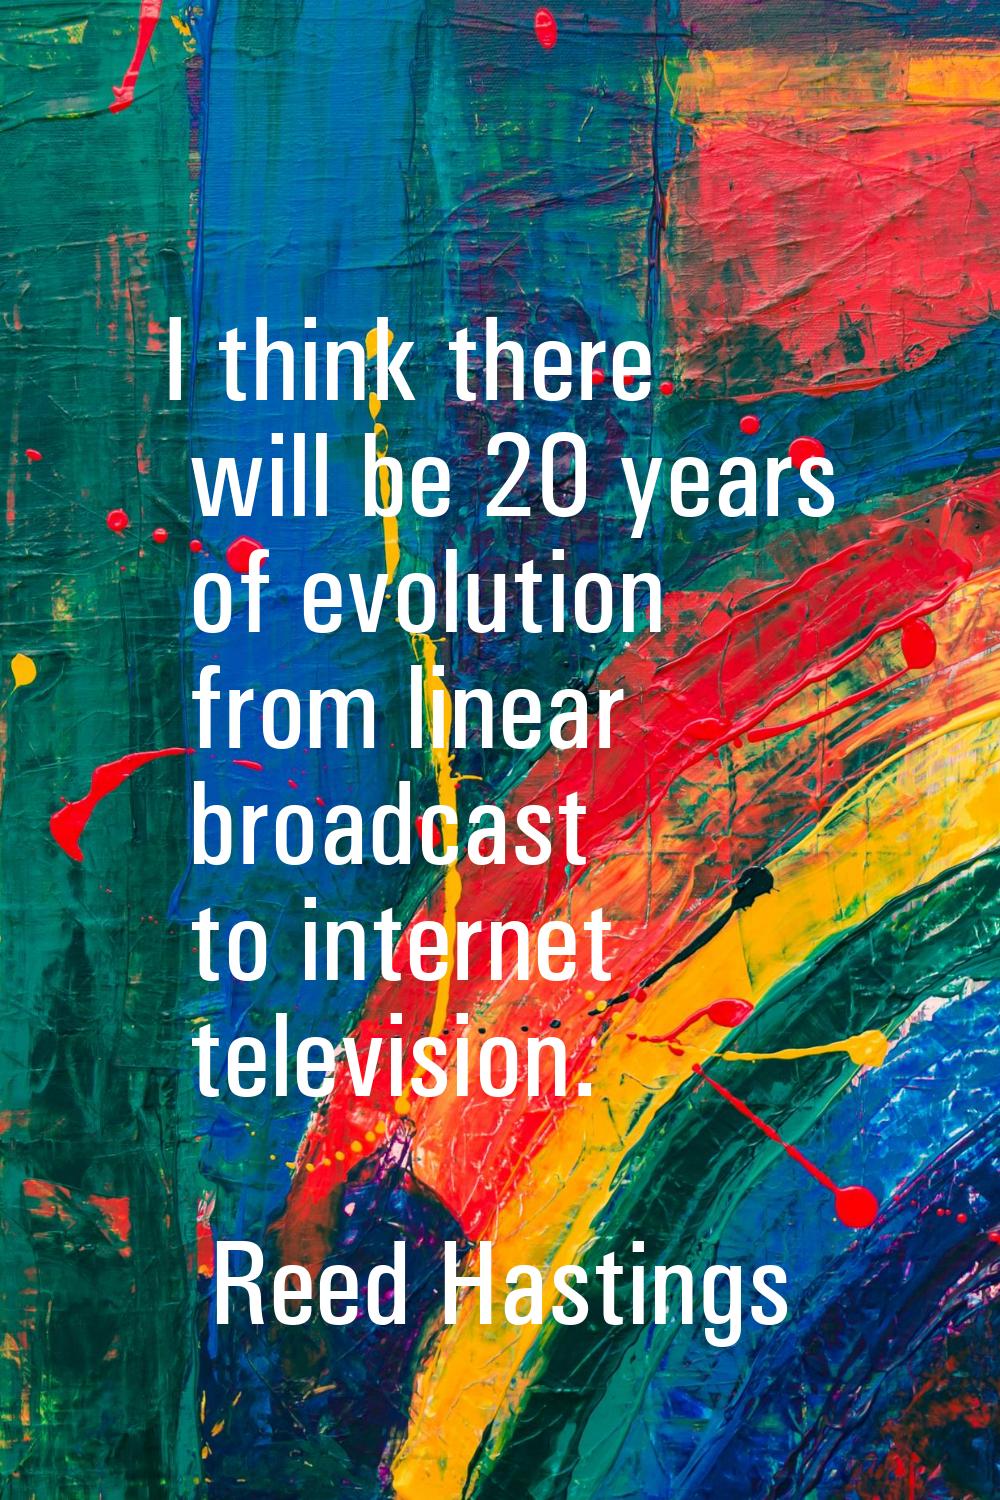 I think there will be 20 years of evolution from linear broadcast to internet television.